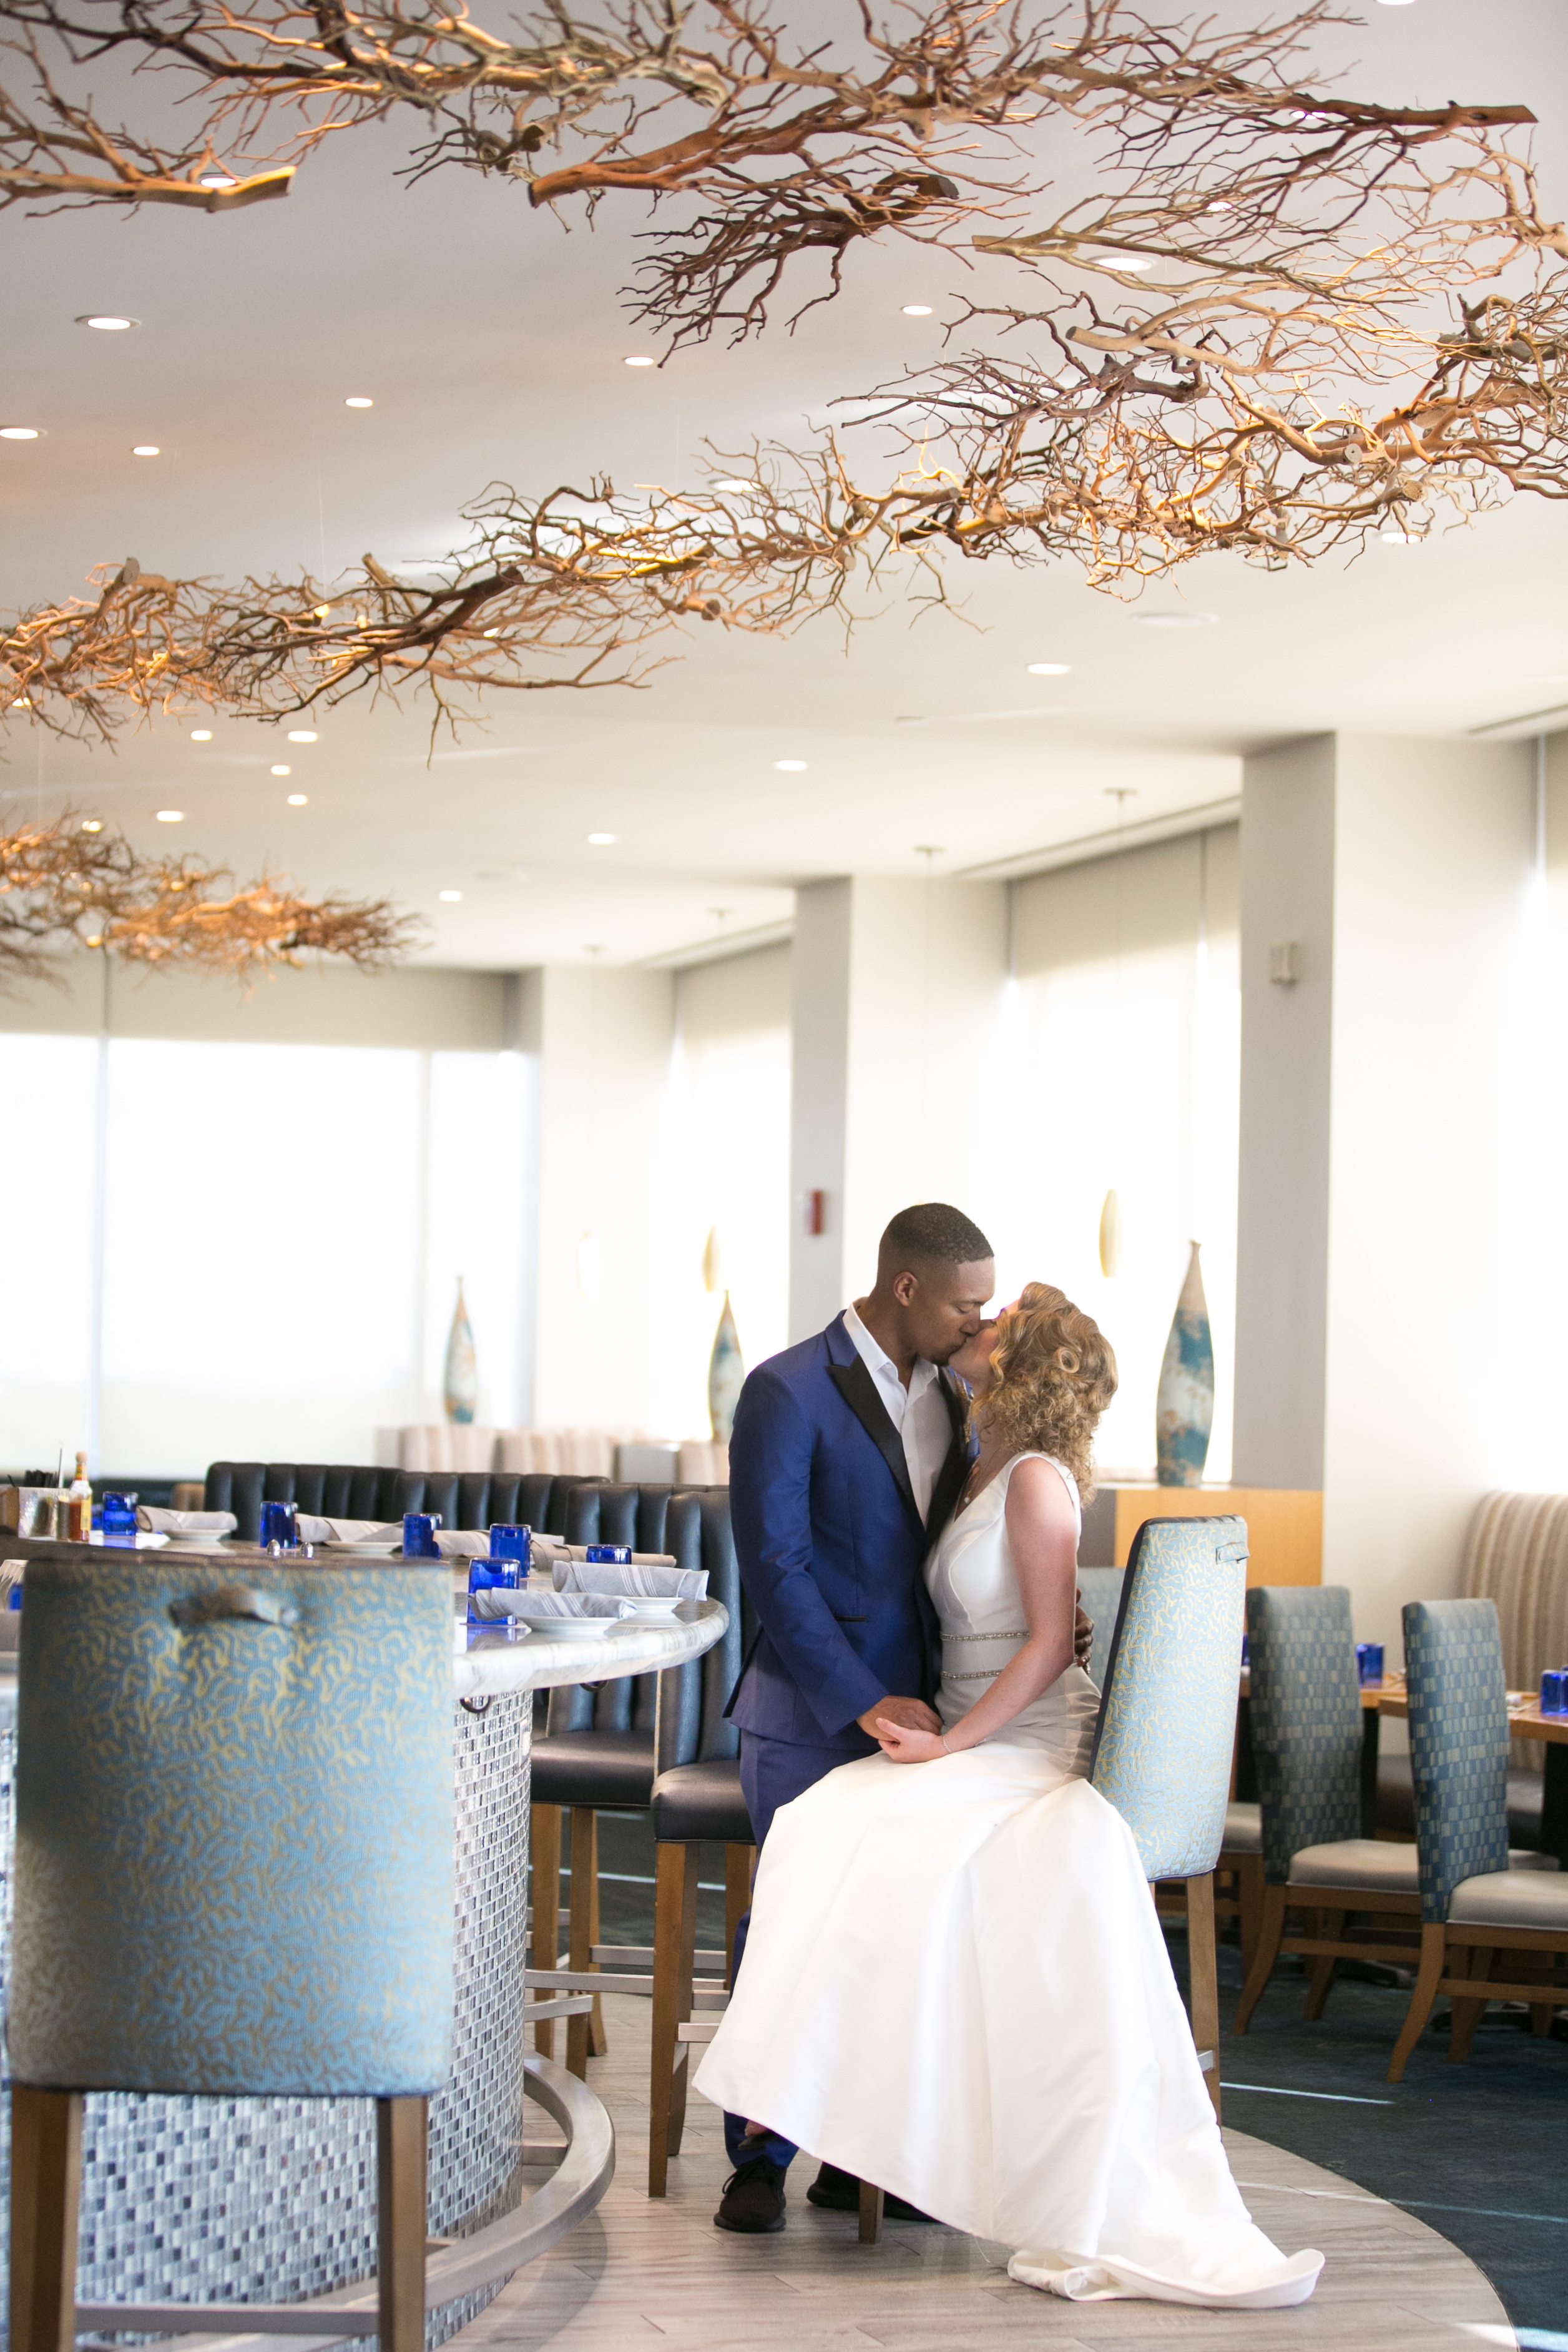 Romantic Bride and Groom Hotel Restaurant with Unique Wood Art Sculpture | Tampa Wedding Venue Centre Club | Wedding Photographer Carrie Wildes Photography